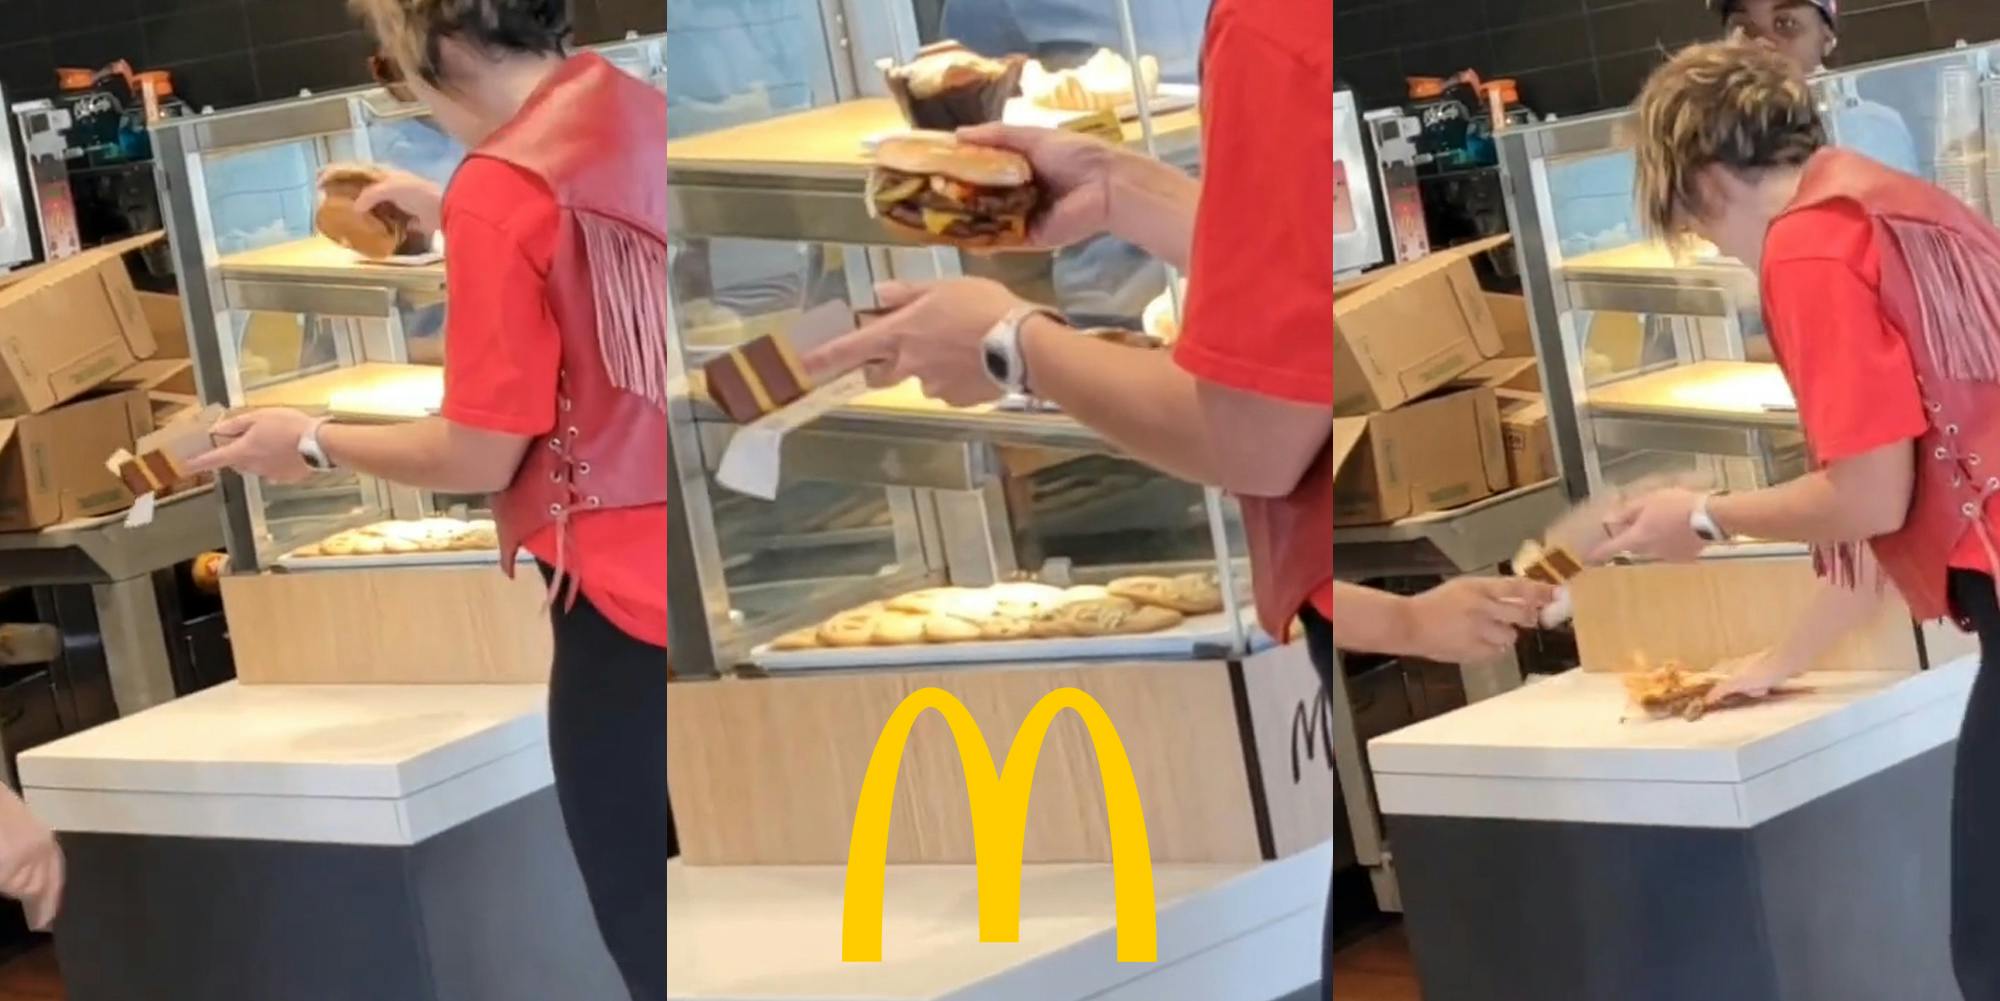 McDonald's customer holding burger up at counter (l) McDonald's customer holding burger with ketchup on it with McDonald's golden arches "m" logo at bottom (c) McDonald's customer slamming burger onto counter (r)